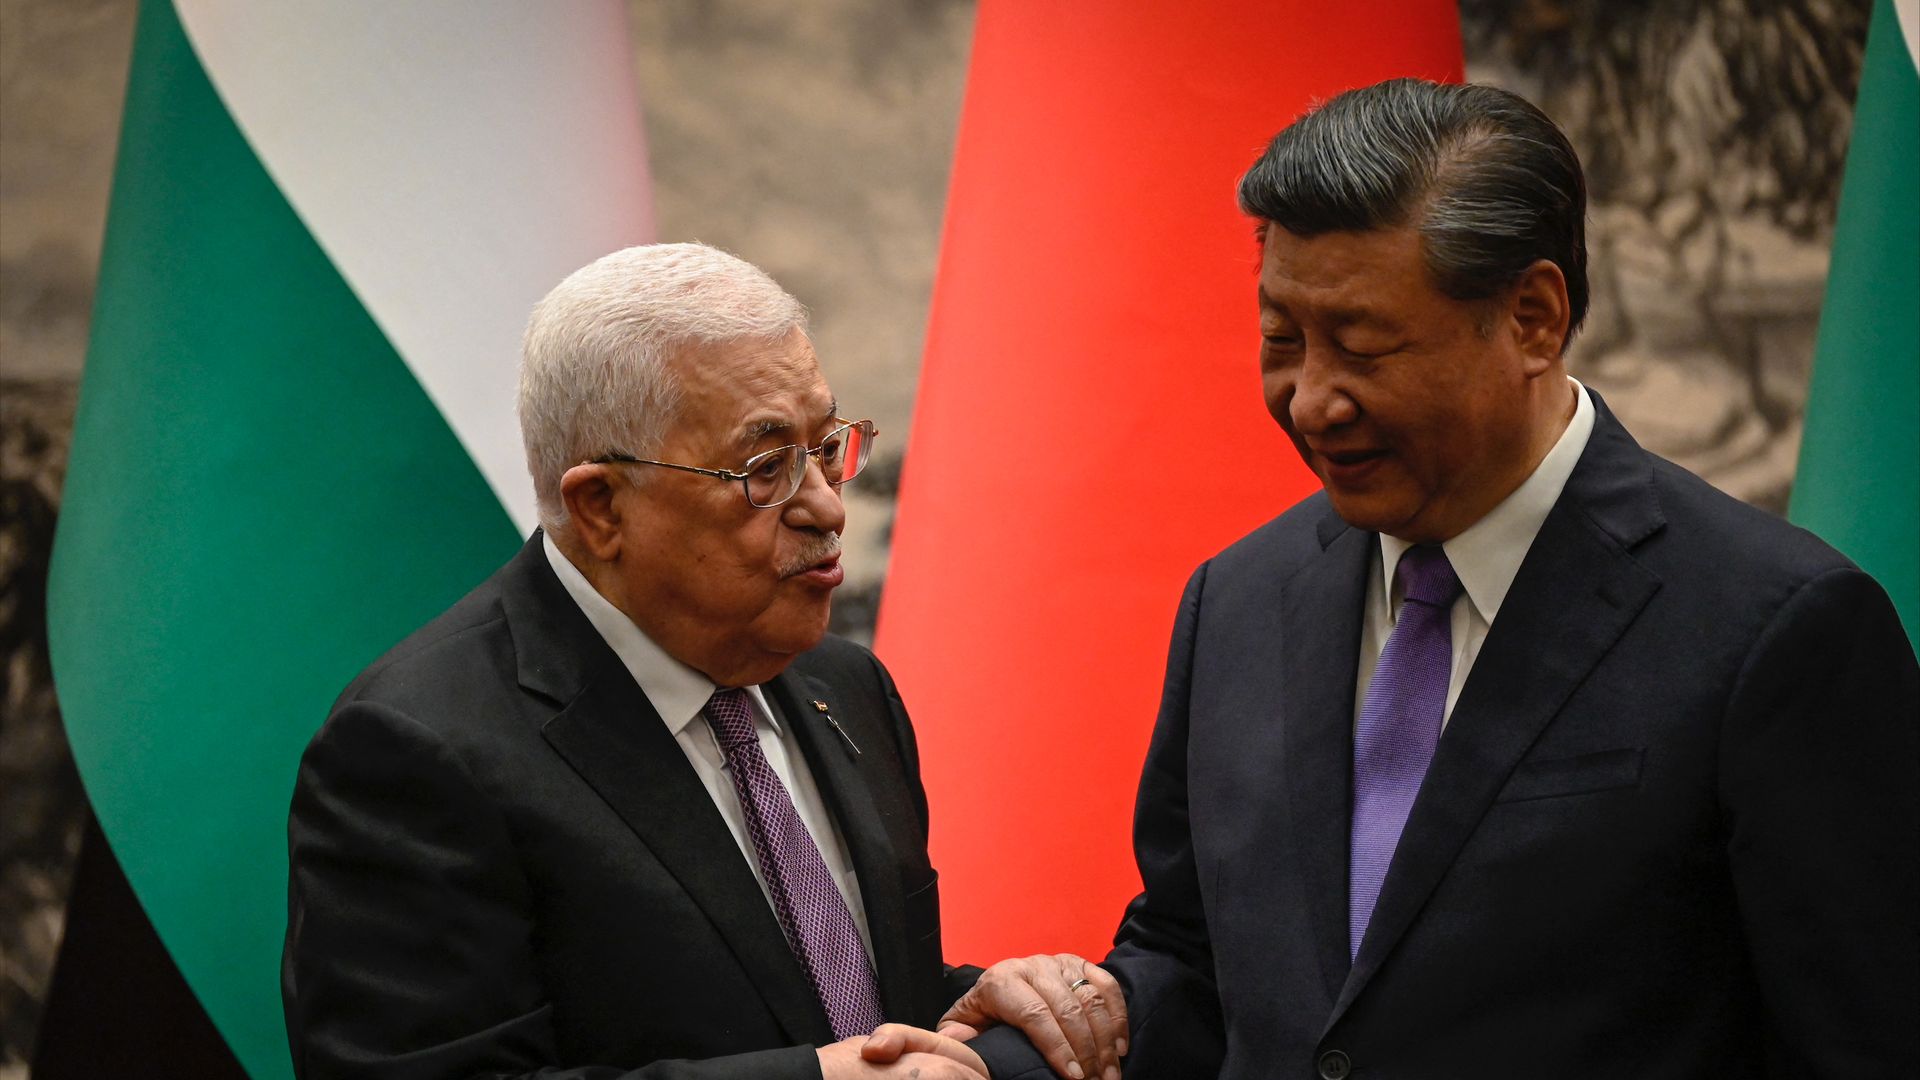 Palestinian President Mahmoud Abbas with Chinese President Xi Jinping